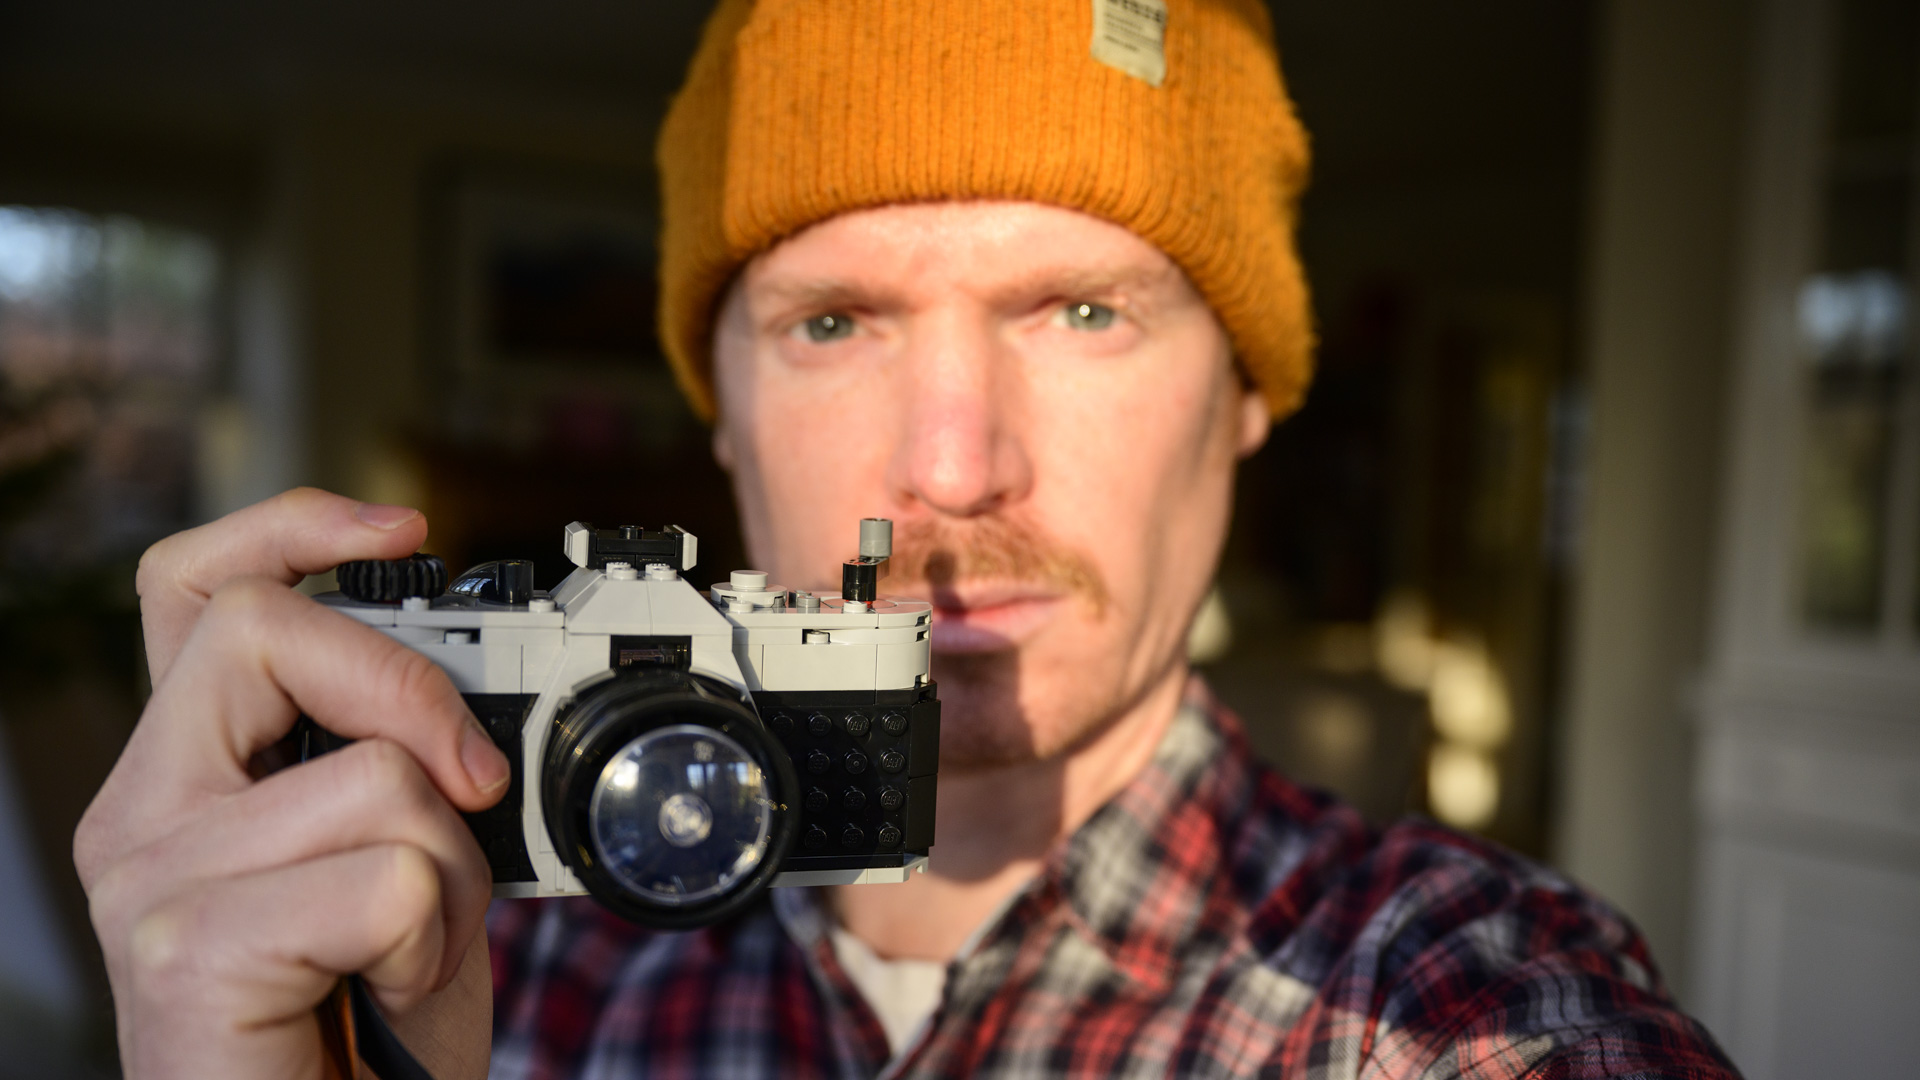 Reviewer holding the complete Lego Retro camera in golden hour light